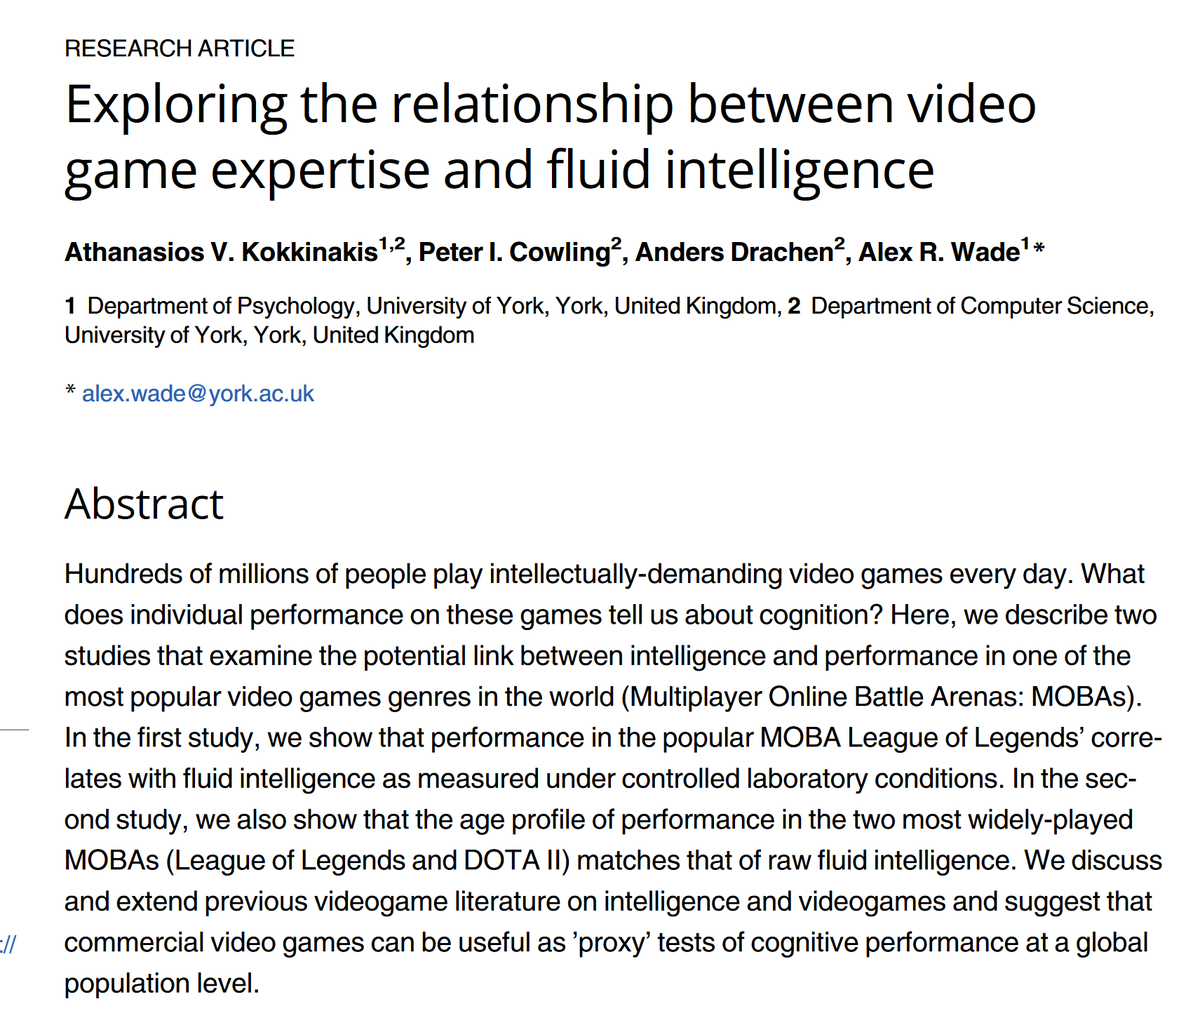 Ender's Game/Last Starfighter were right: video game performance shows real skills:Good Civilization players have better management skillsPerformance in MOBAs like Dota correlates with IQGuild leaders in World of Warcraft are more likely to be good leaders in real life